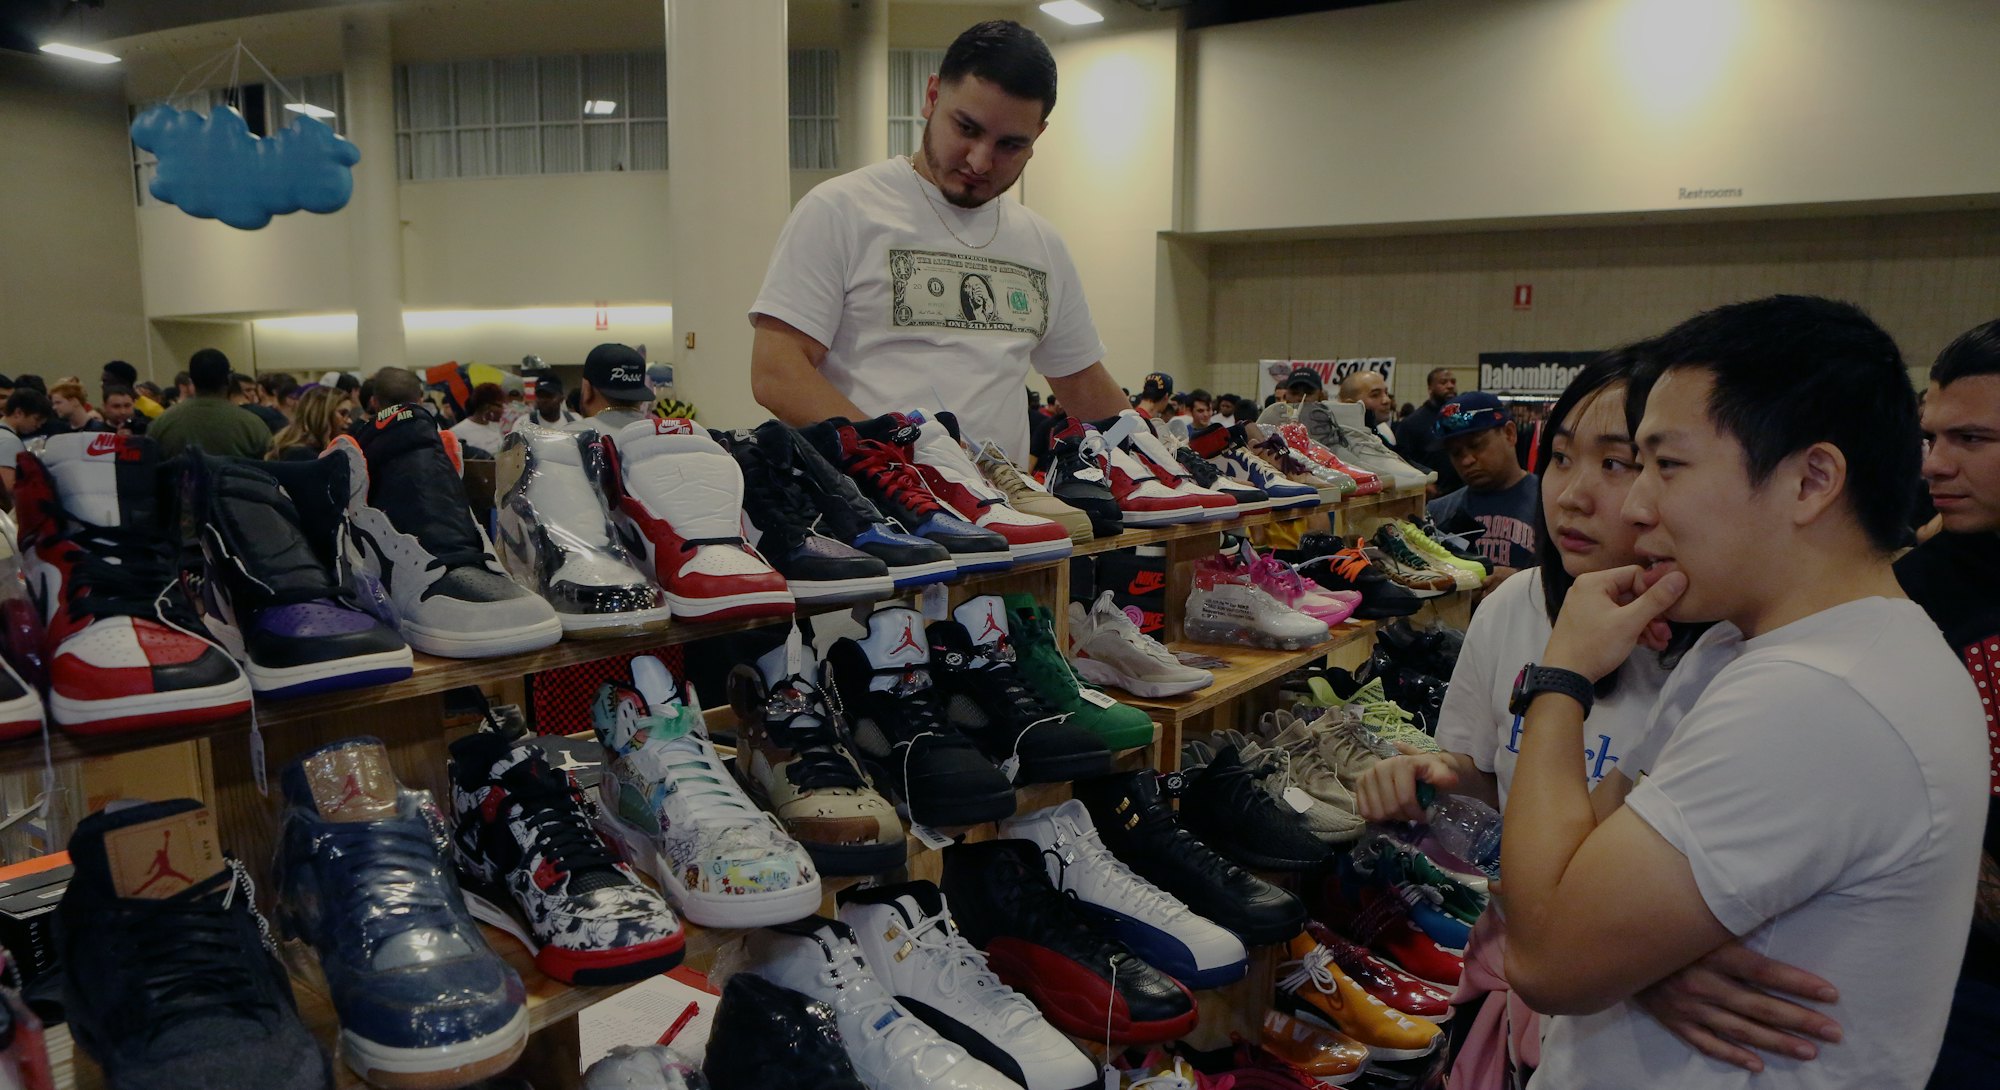 FT LAUDERDALE, FLORIDA - FEBRUARY 02: Shoppers inspect sneakers on sale by Texas Shoe Exchange durin...